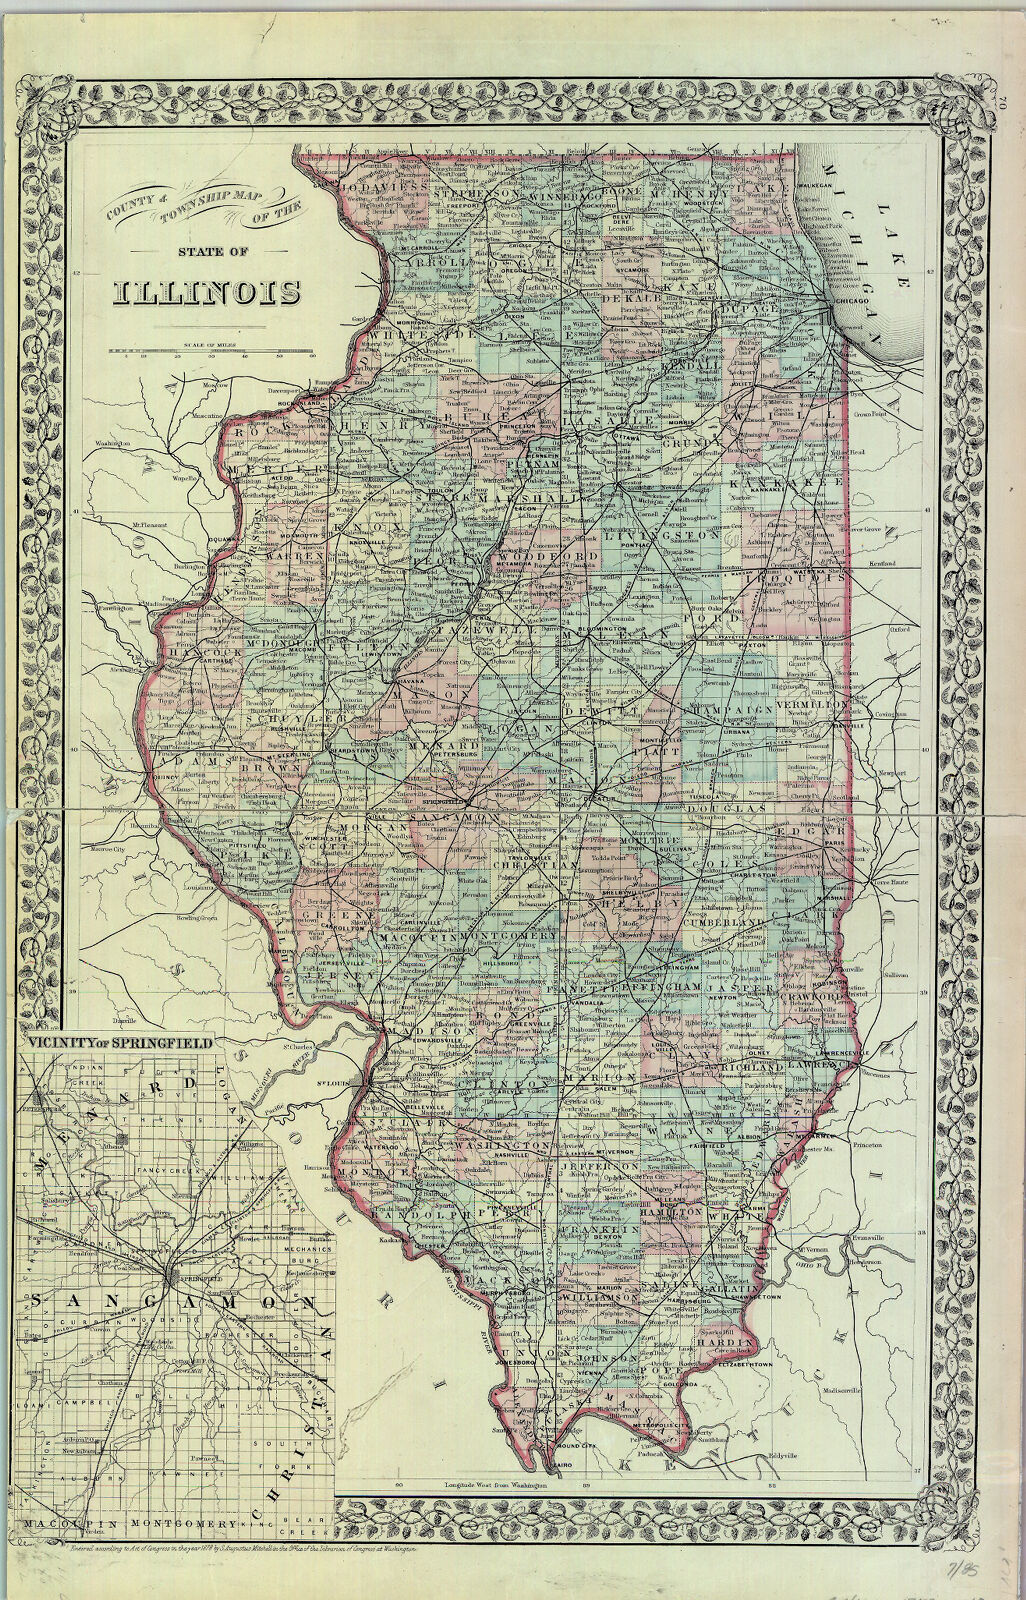 County And Township Map Of The State Of Illinois Digital Collections At The University Of 5147